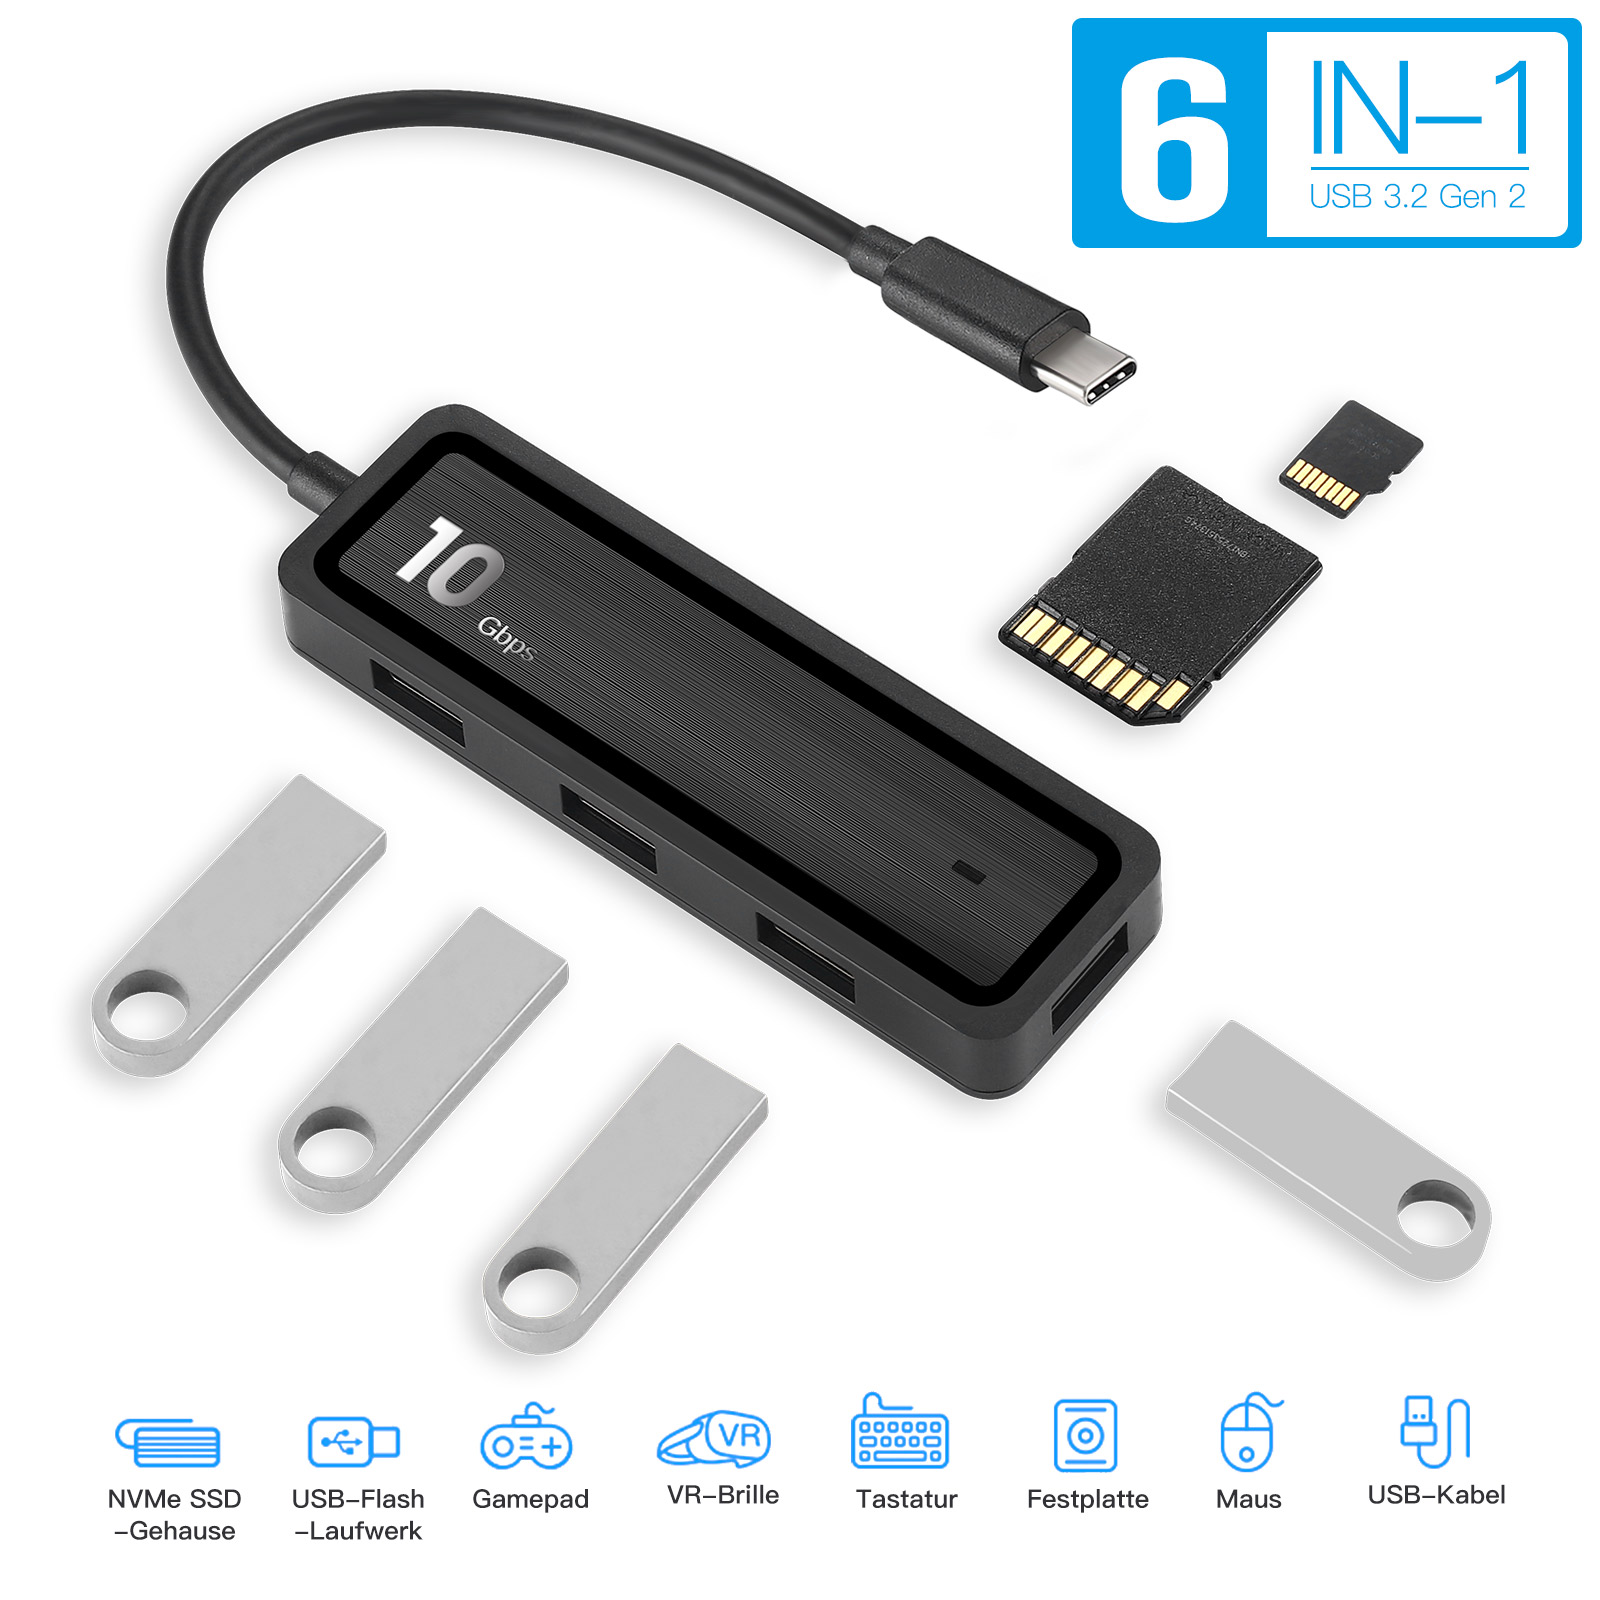 Pinrui 6 in 1 USB Hub 4-Port USB3.1 Gen 2 Expander with SD/ TF Adapter Laptop Docking Station